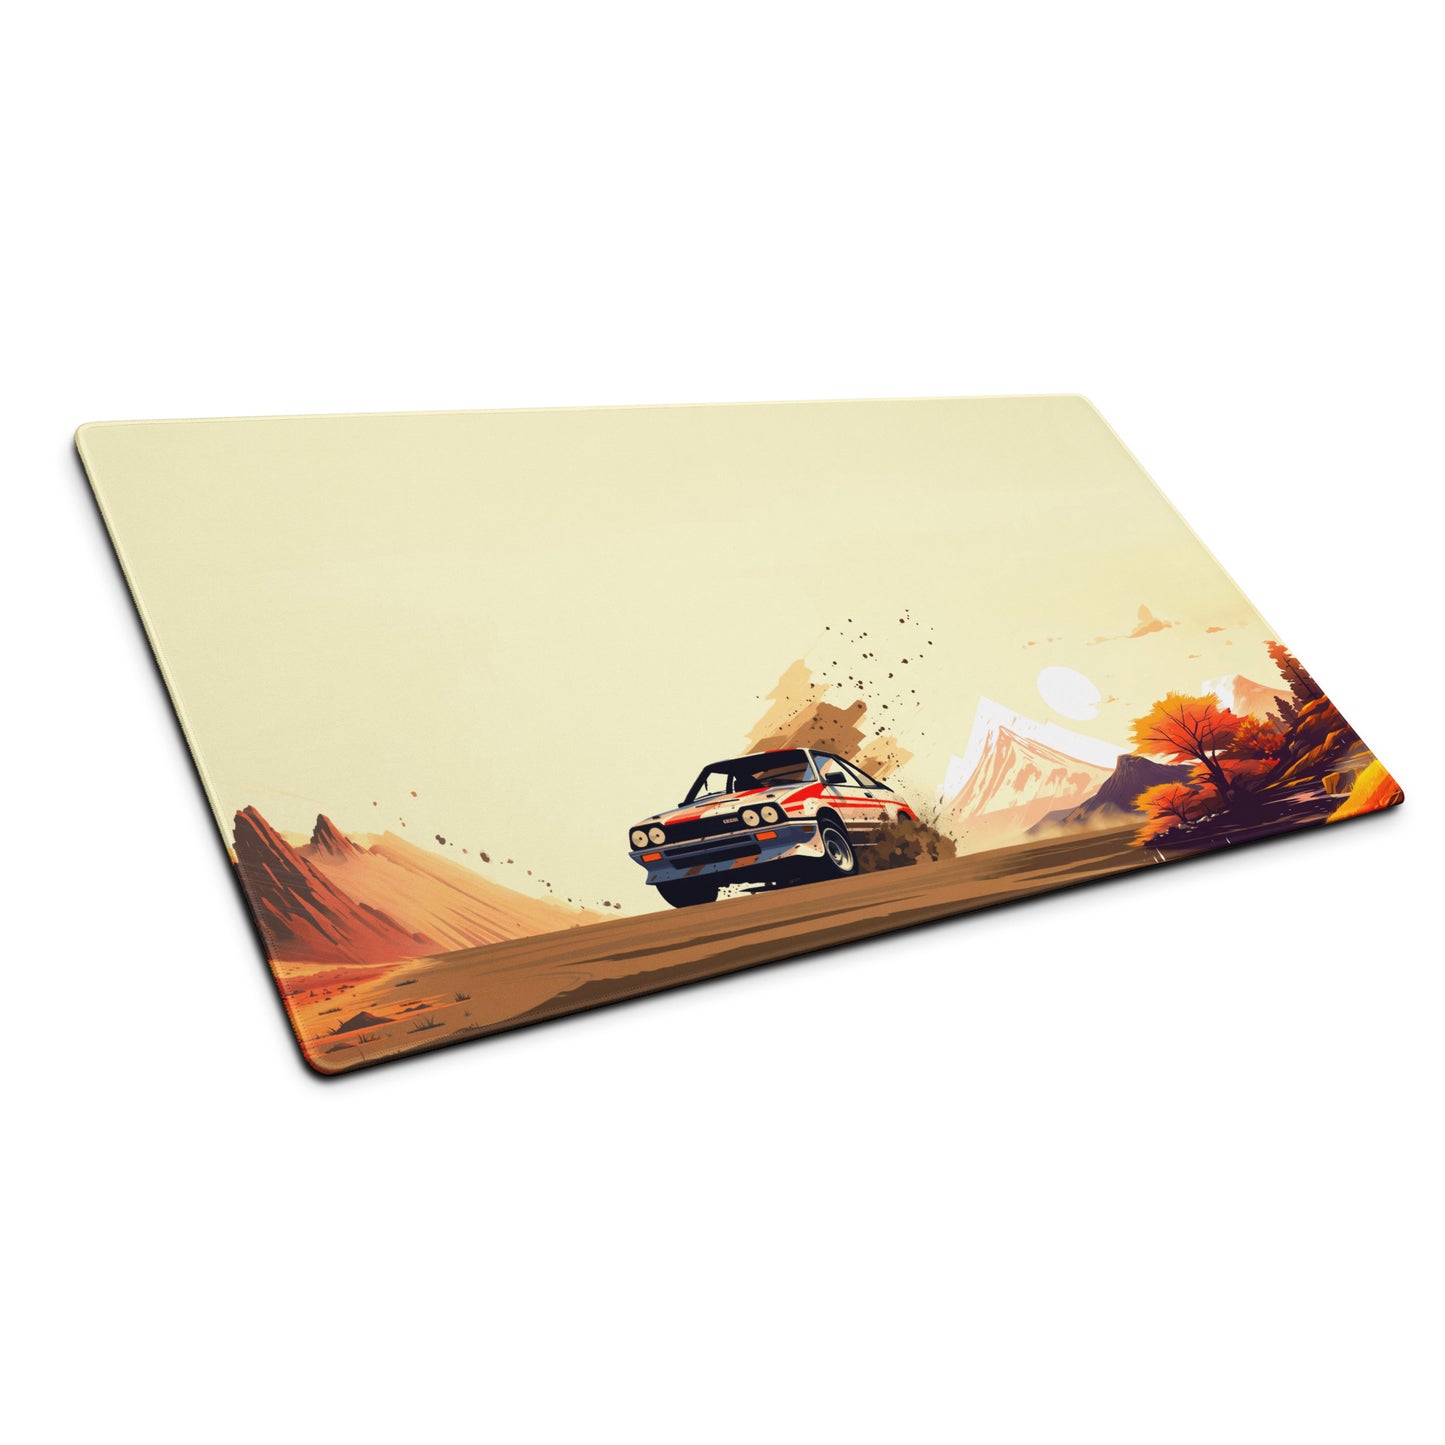 A 36" x 18" gaming desk pad with a Rally car racing through the desert shown at an angle. Brown and Beige in Color.